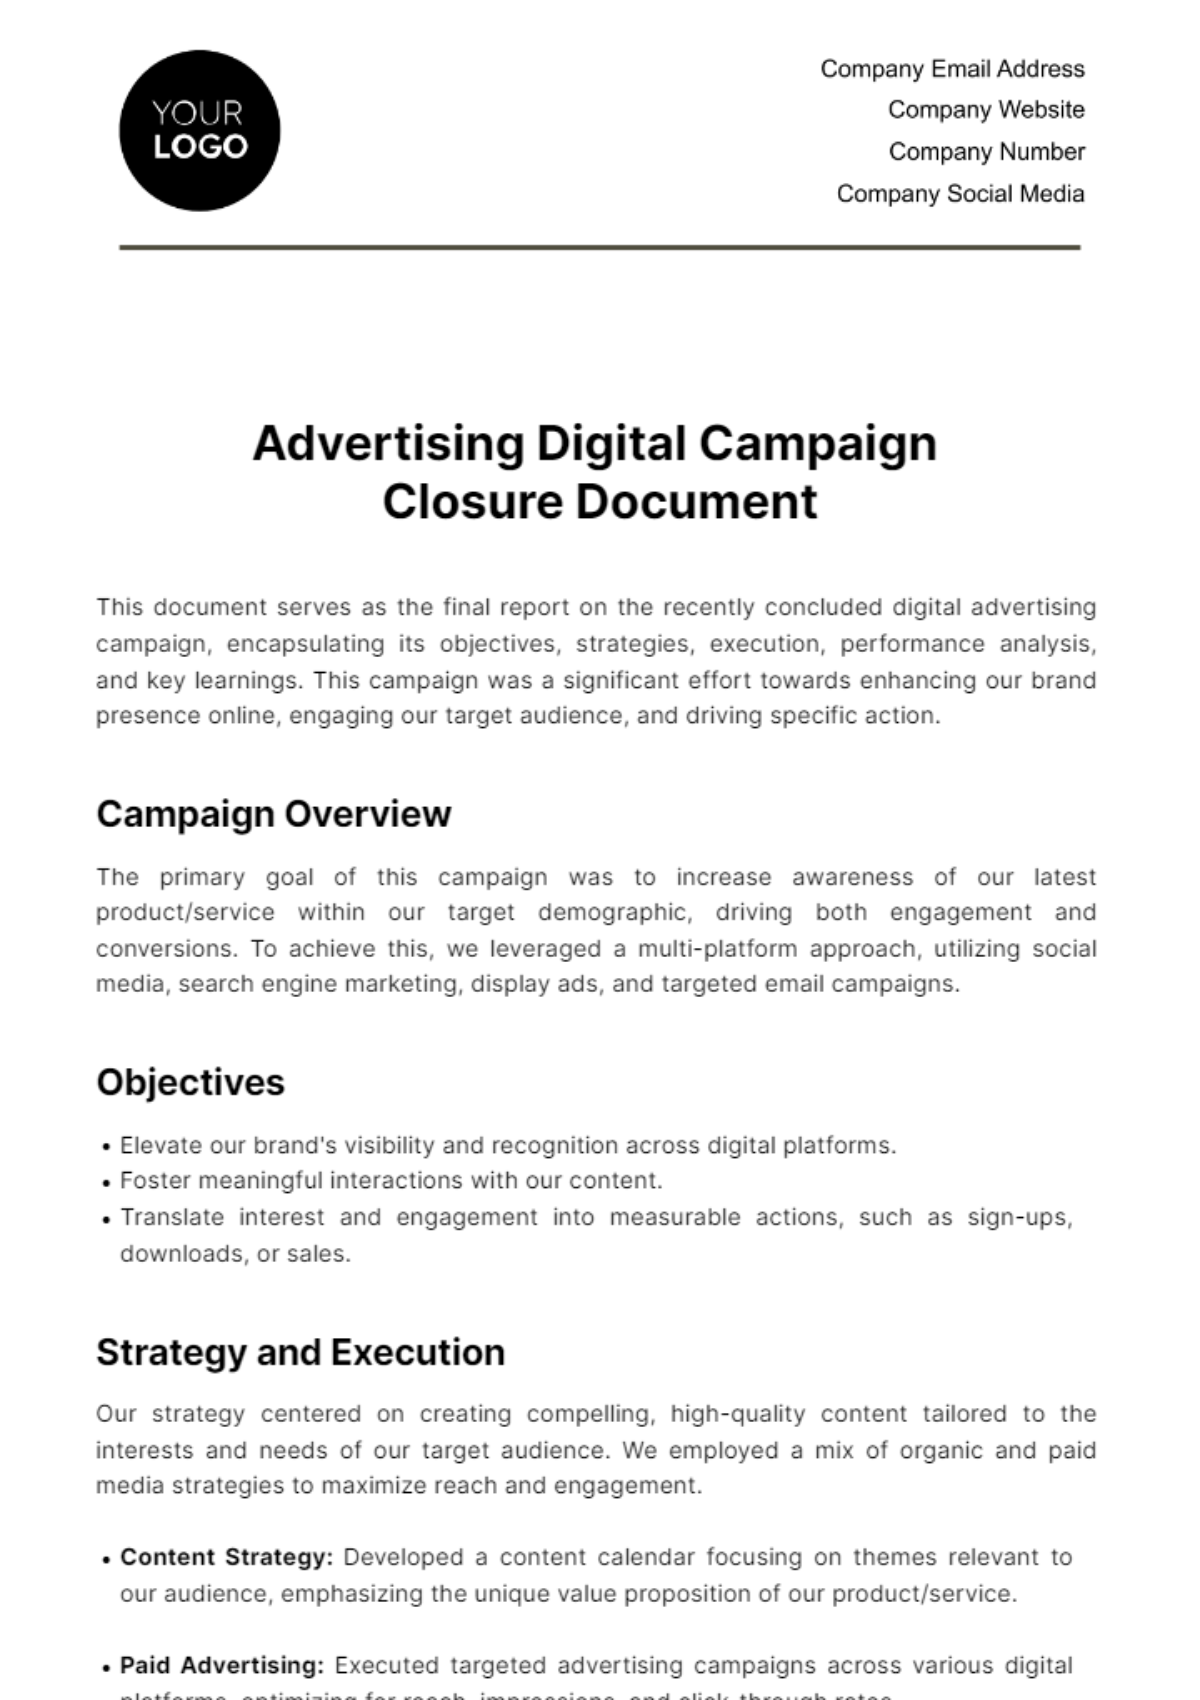 Free Advertising Digital Campaign Closure Document Template